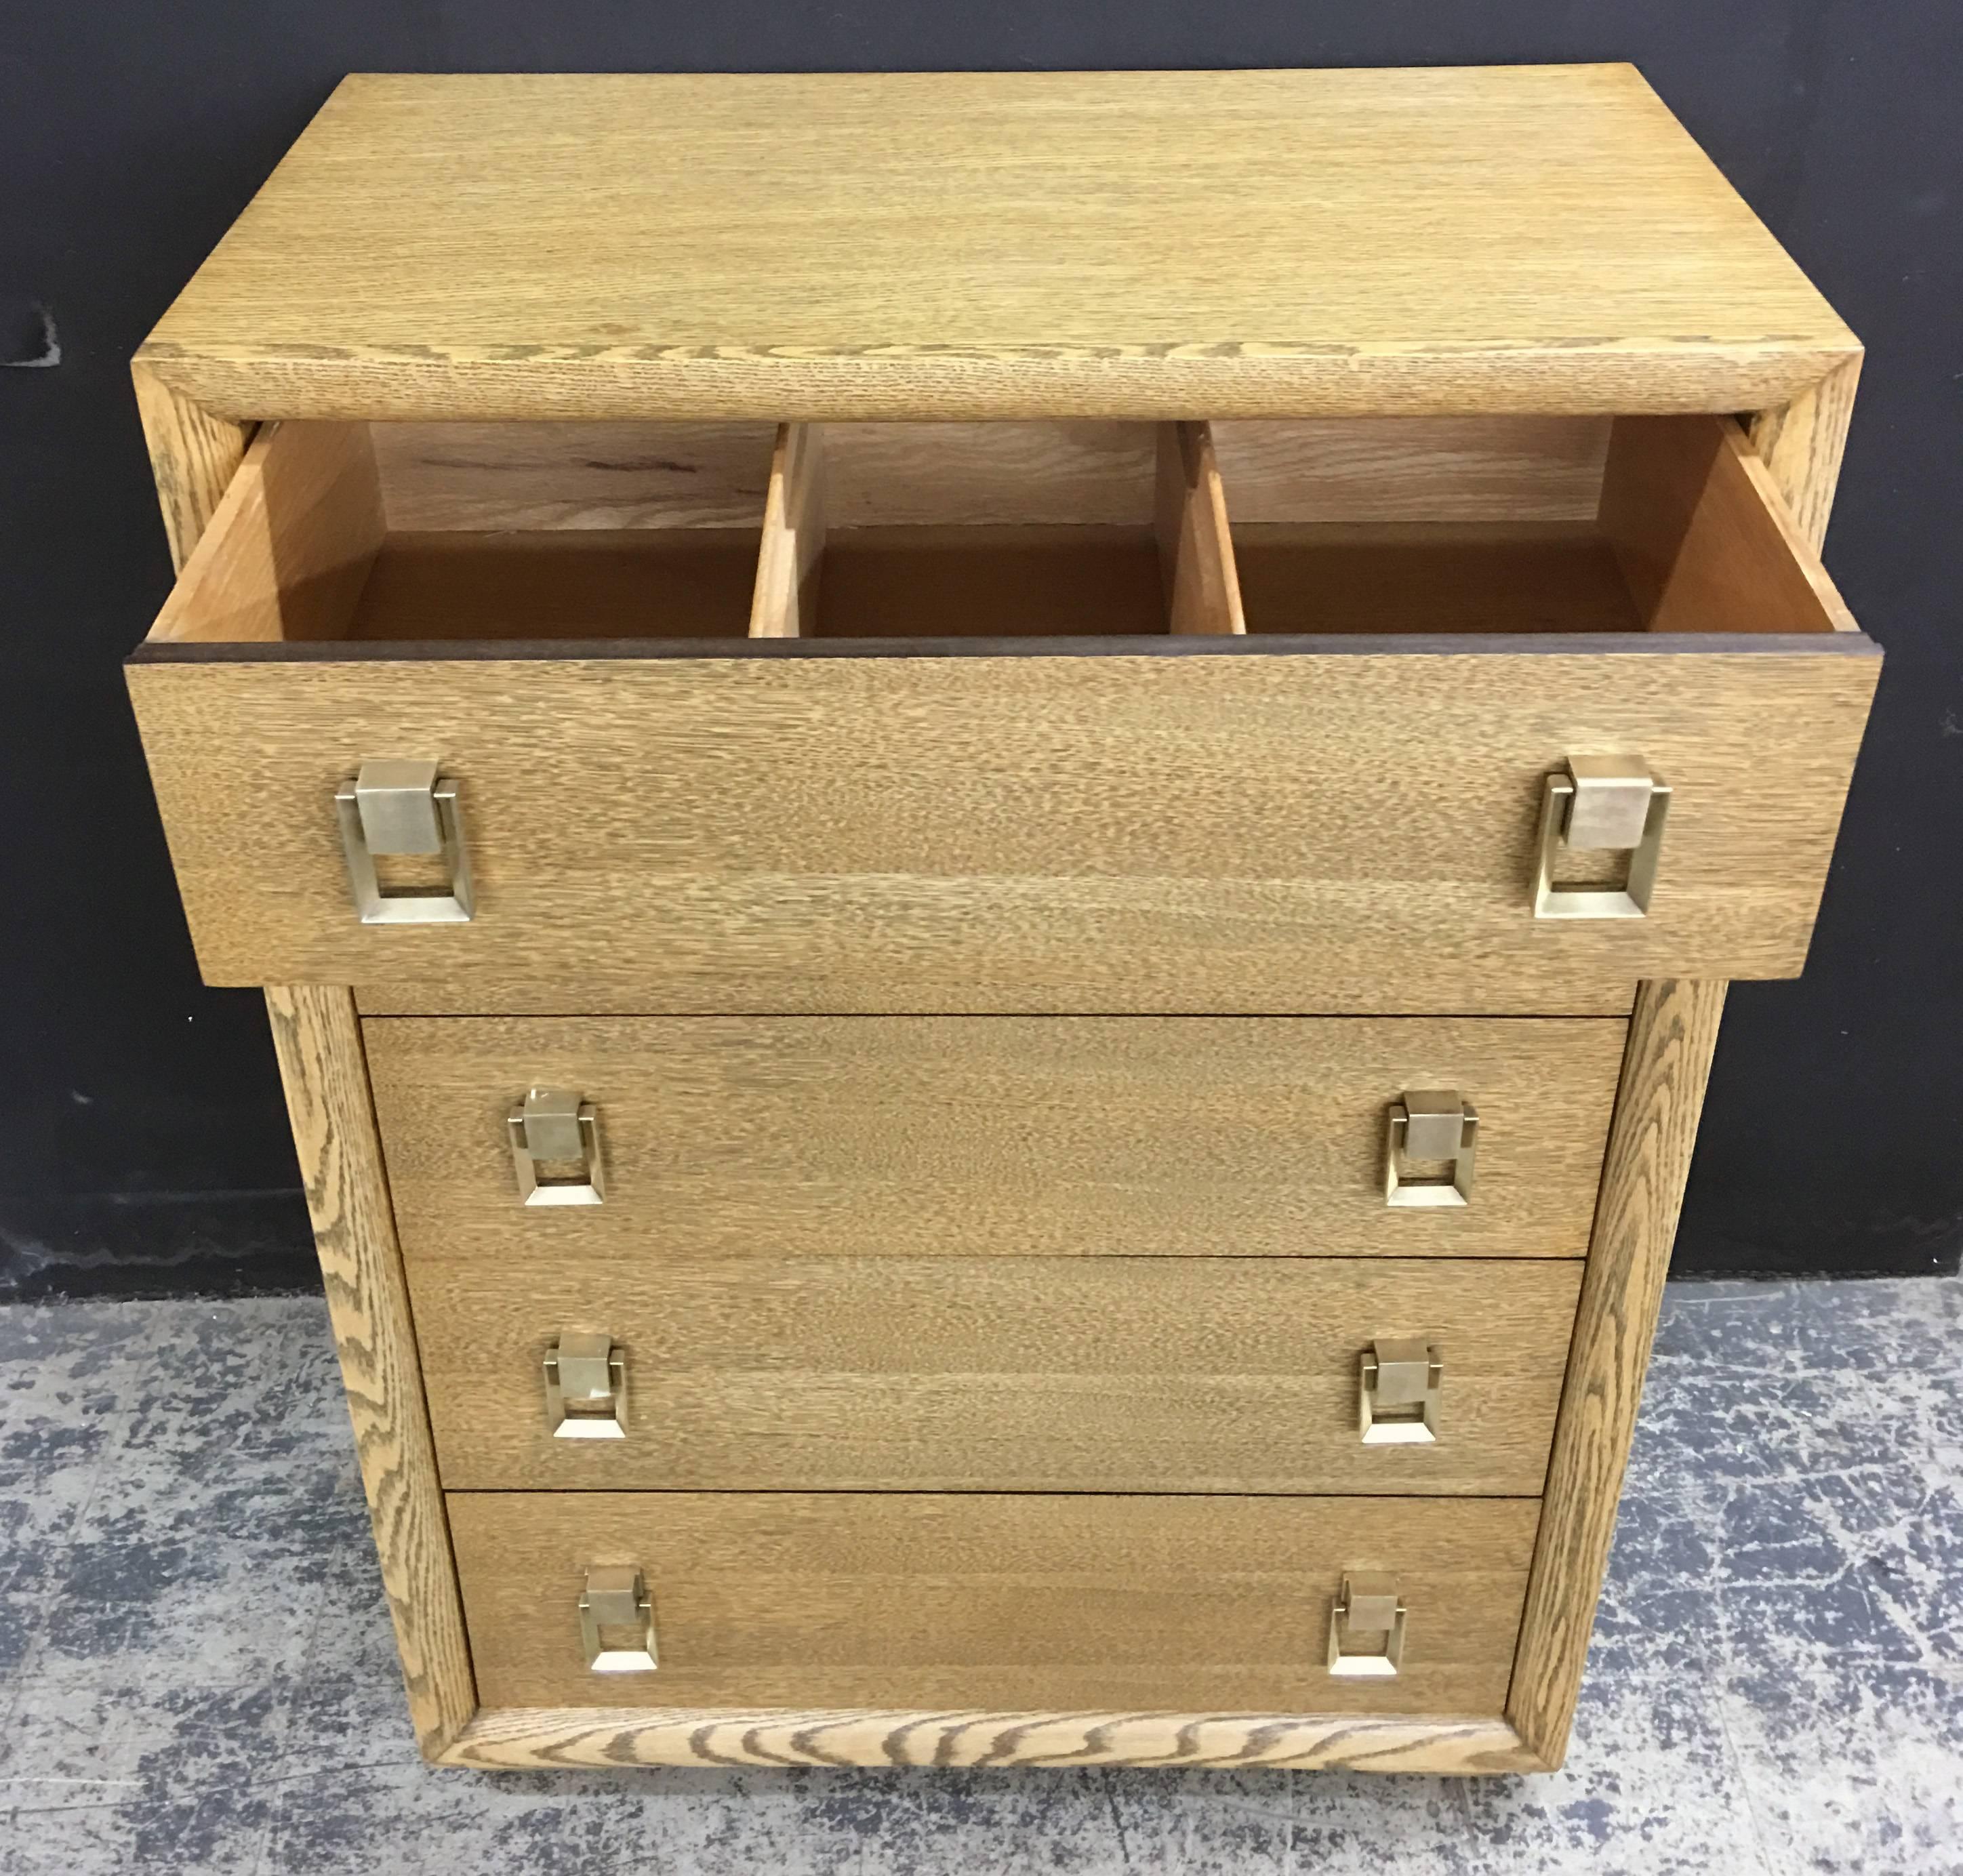 Fully restored and refinished Gilbert-Rohde rift oak dresser with original brass hardware. The dresser has five drawers of equal size, the first two of which are divided into three sections. Measures: Each drawer face is 8